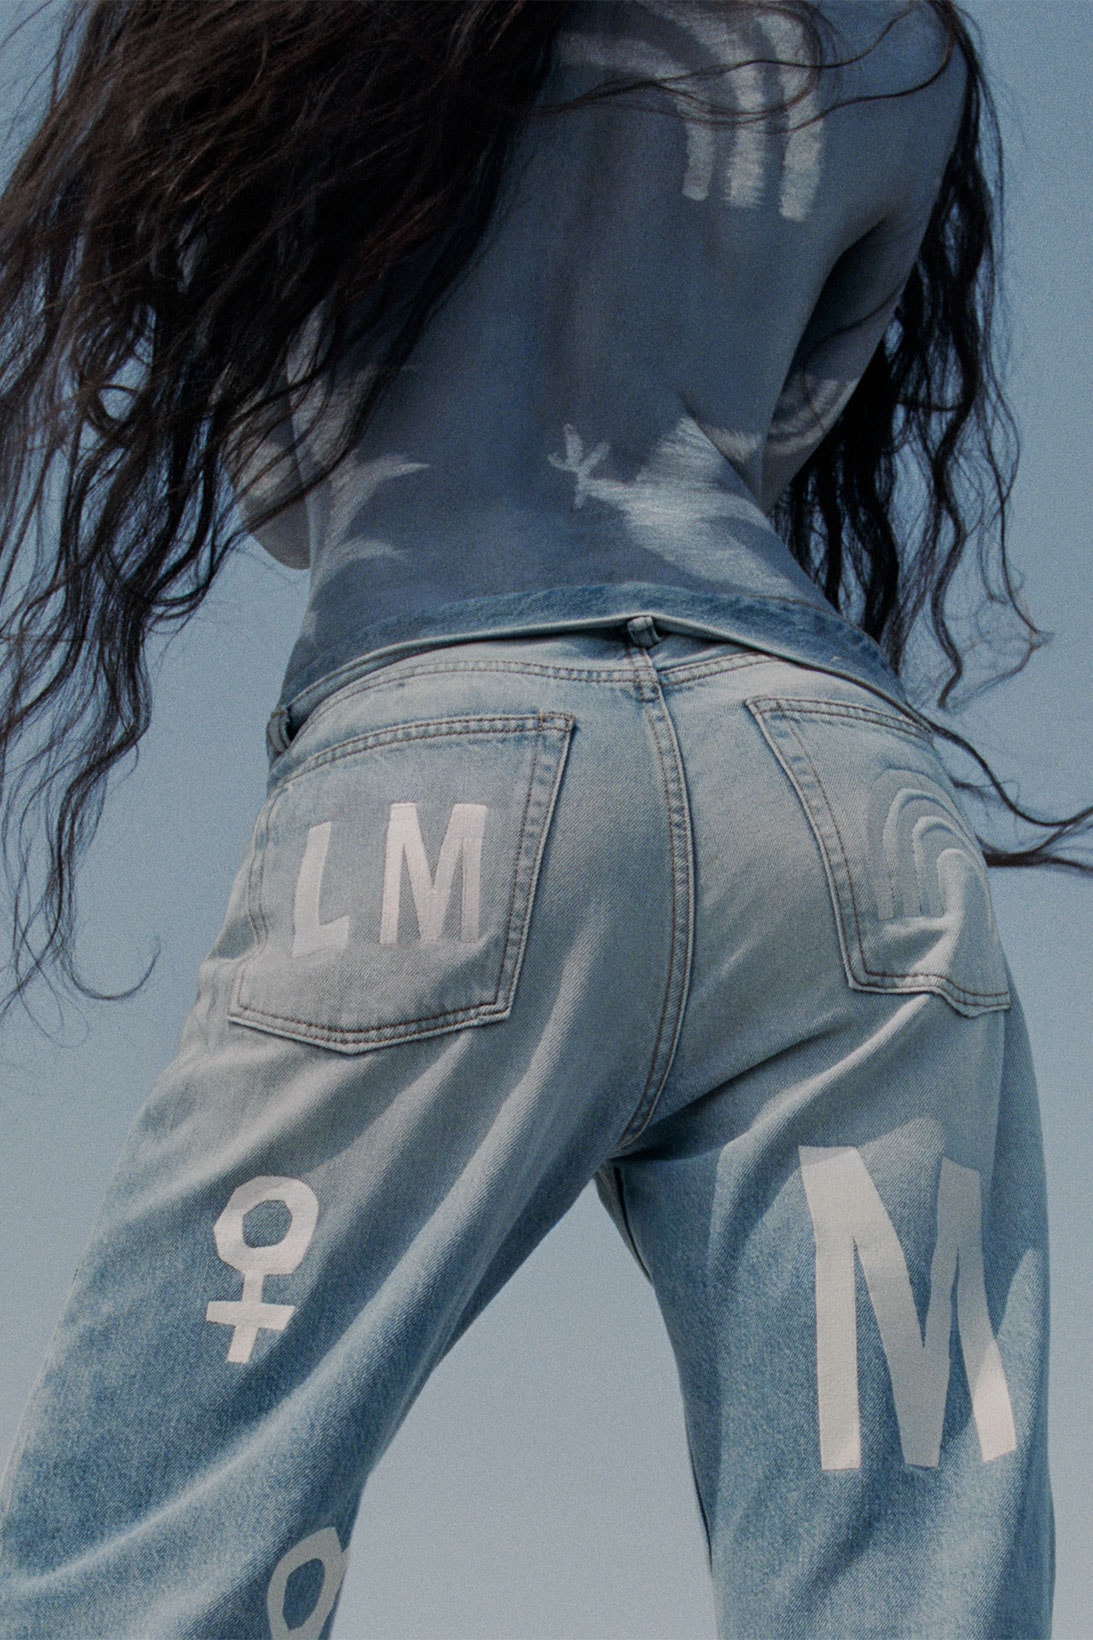 Acne Studios Denim Personalized Customizable Jeans Release Release Where to buy